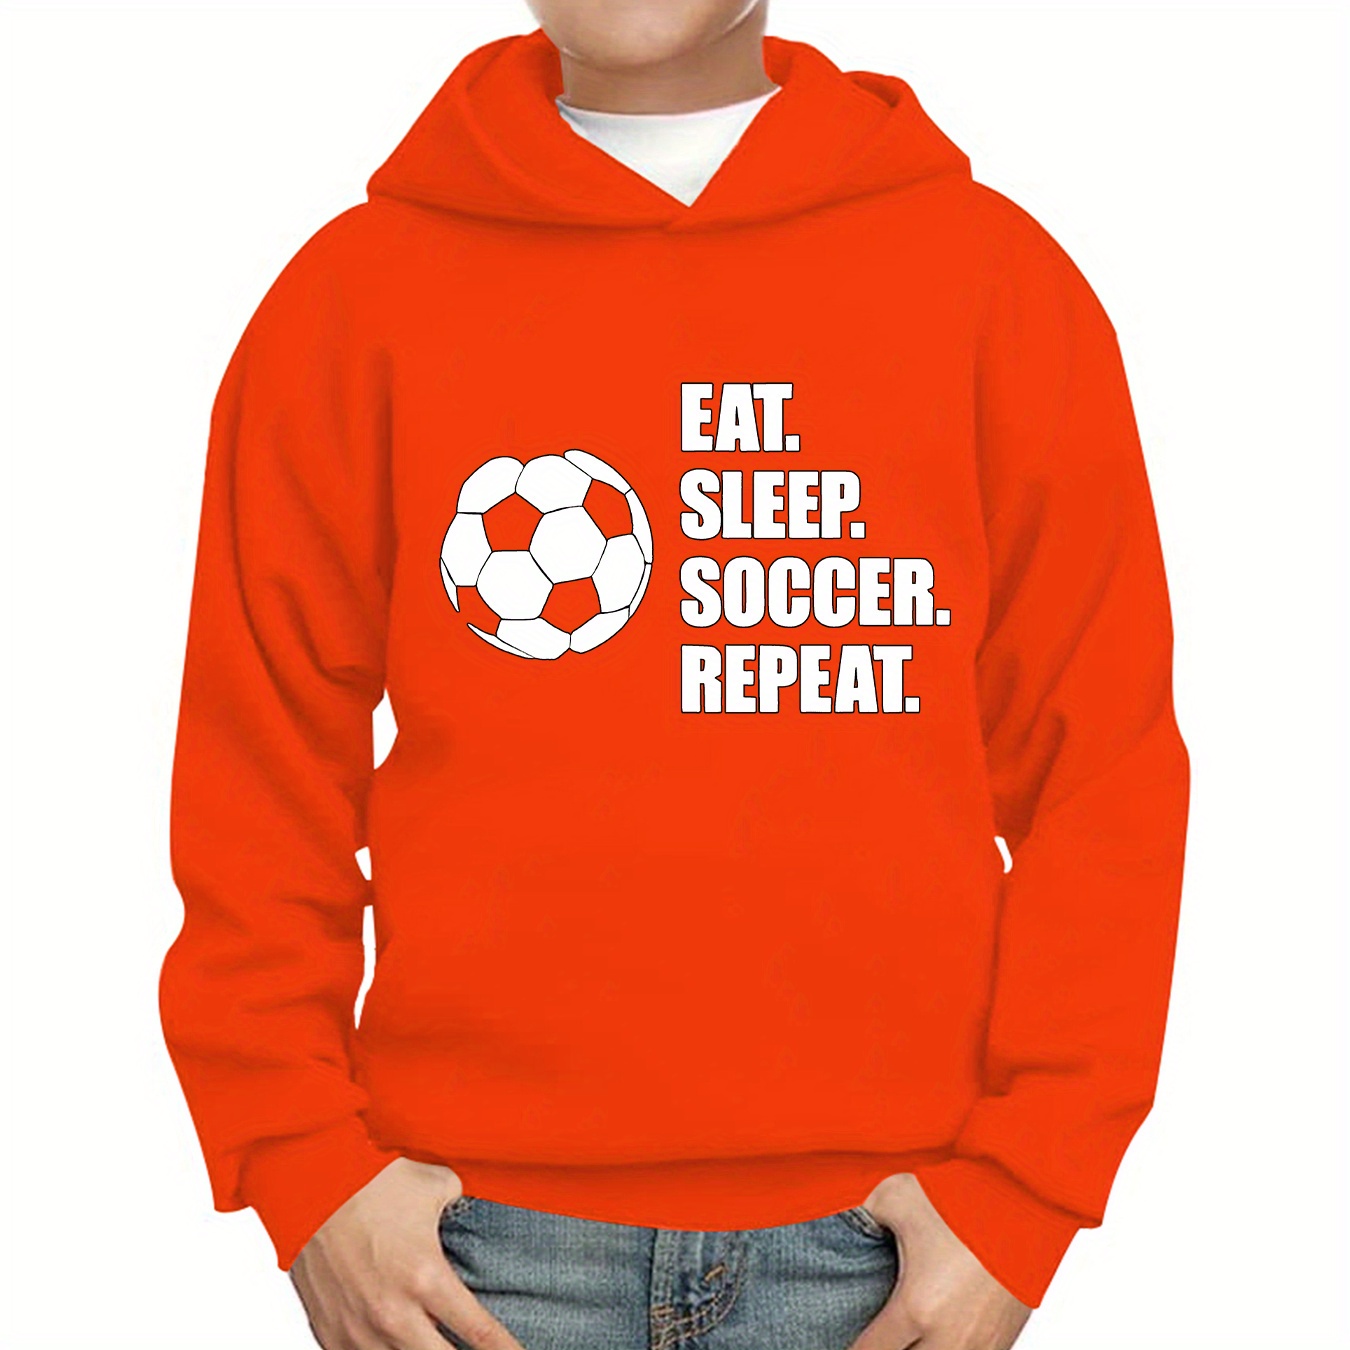 

Stylish Eat Sleep Soccer Repeat Letter Print Hoodies For Boys - Casual Graphic Design With Stretch Fabric For Comfortable Autumn/winter Wear